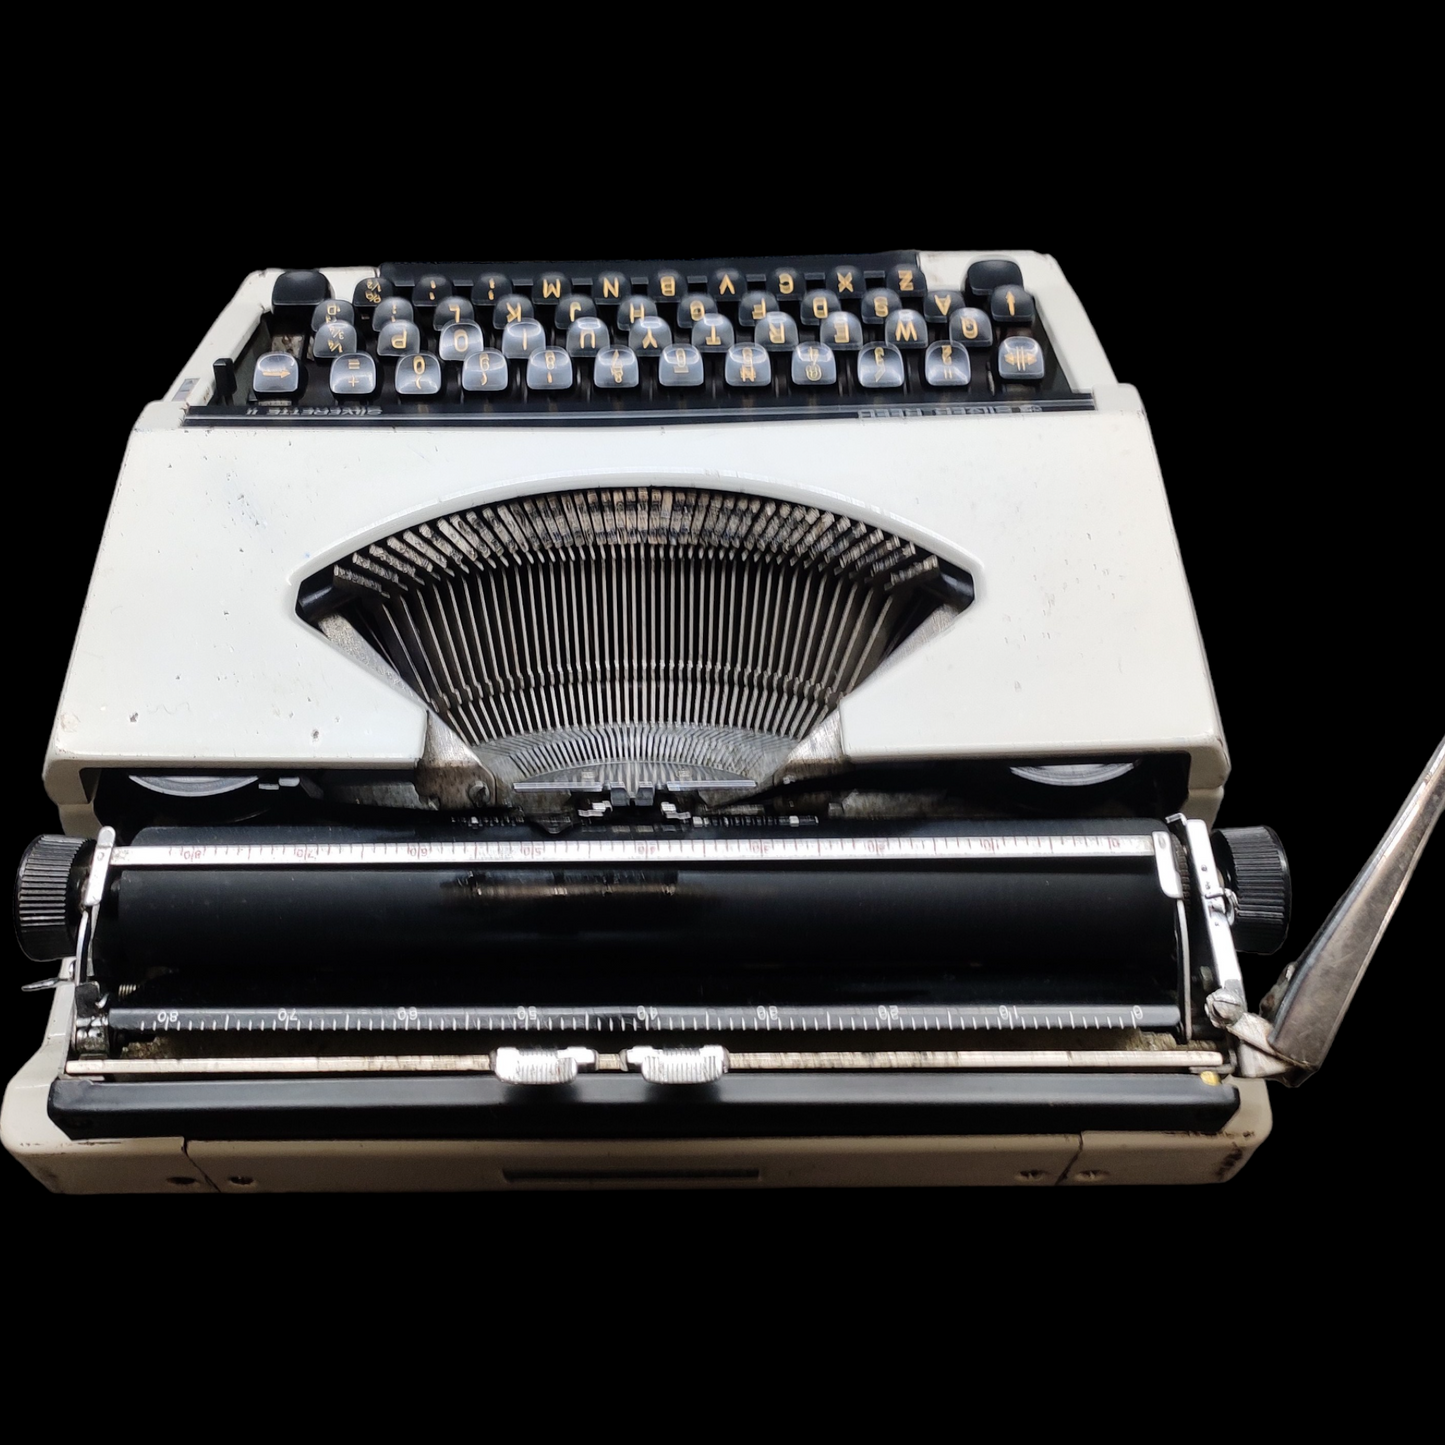 Image of Silver Reed Silverette Typewriter. Original with zip cover. Available from universaltypewritercompany.in